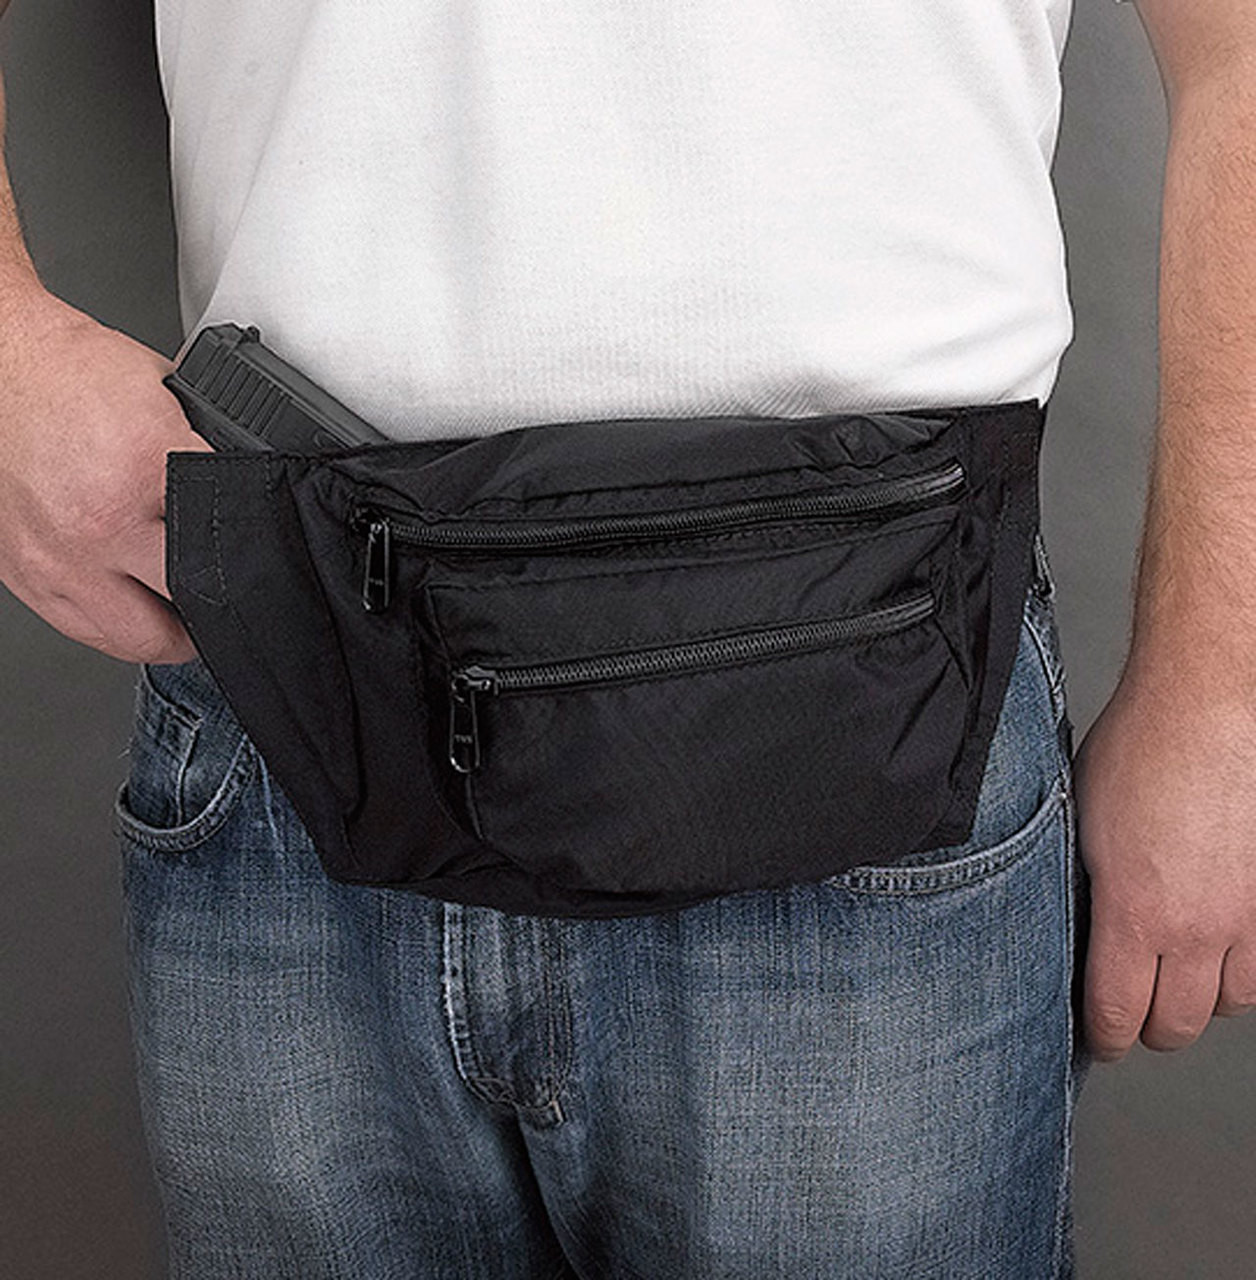 History of the Fanny Pack